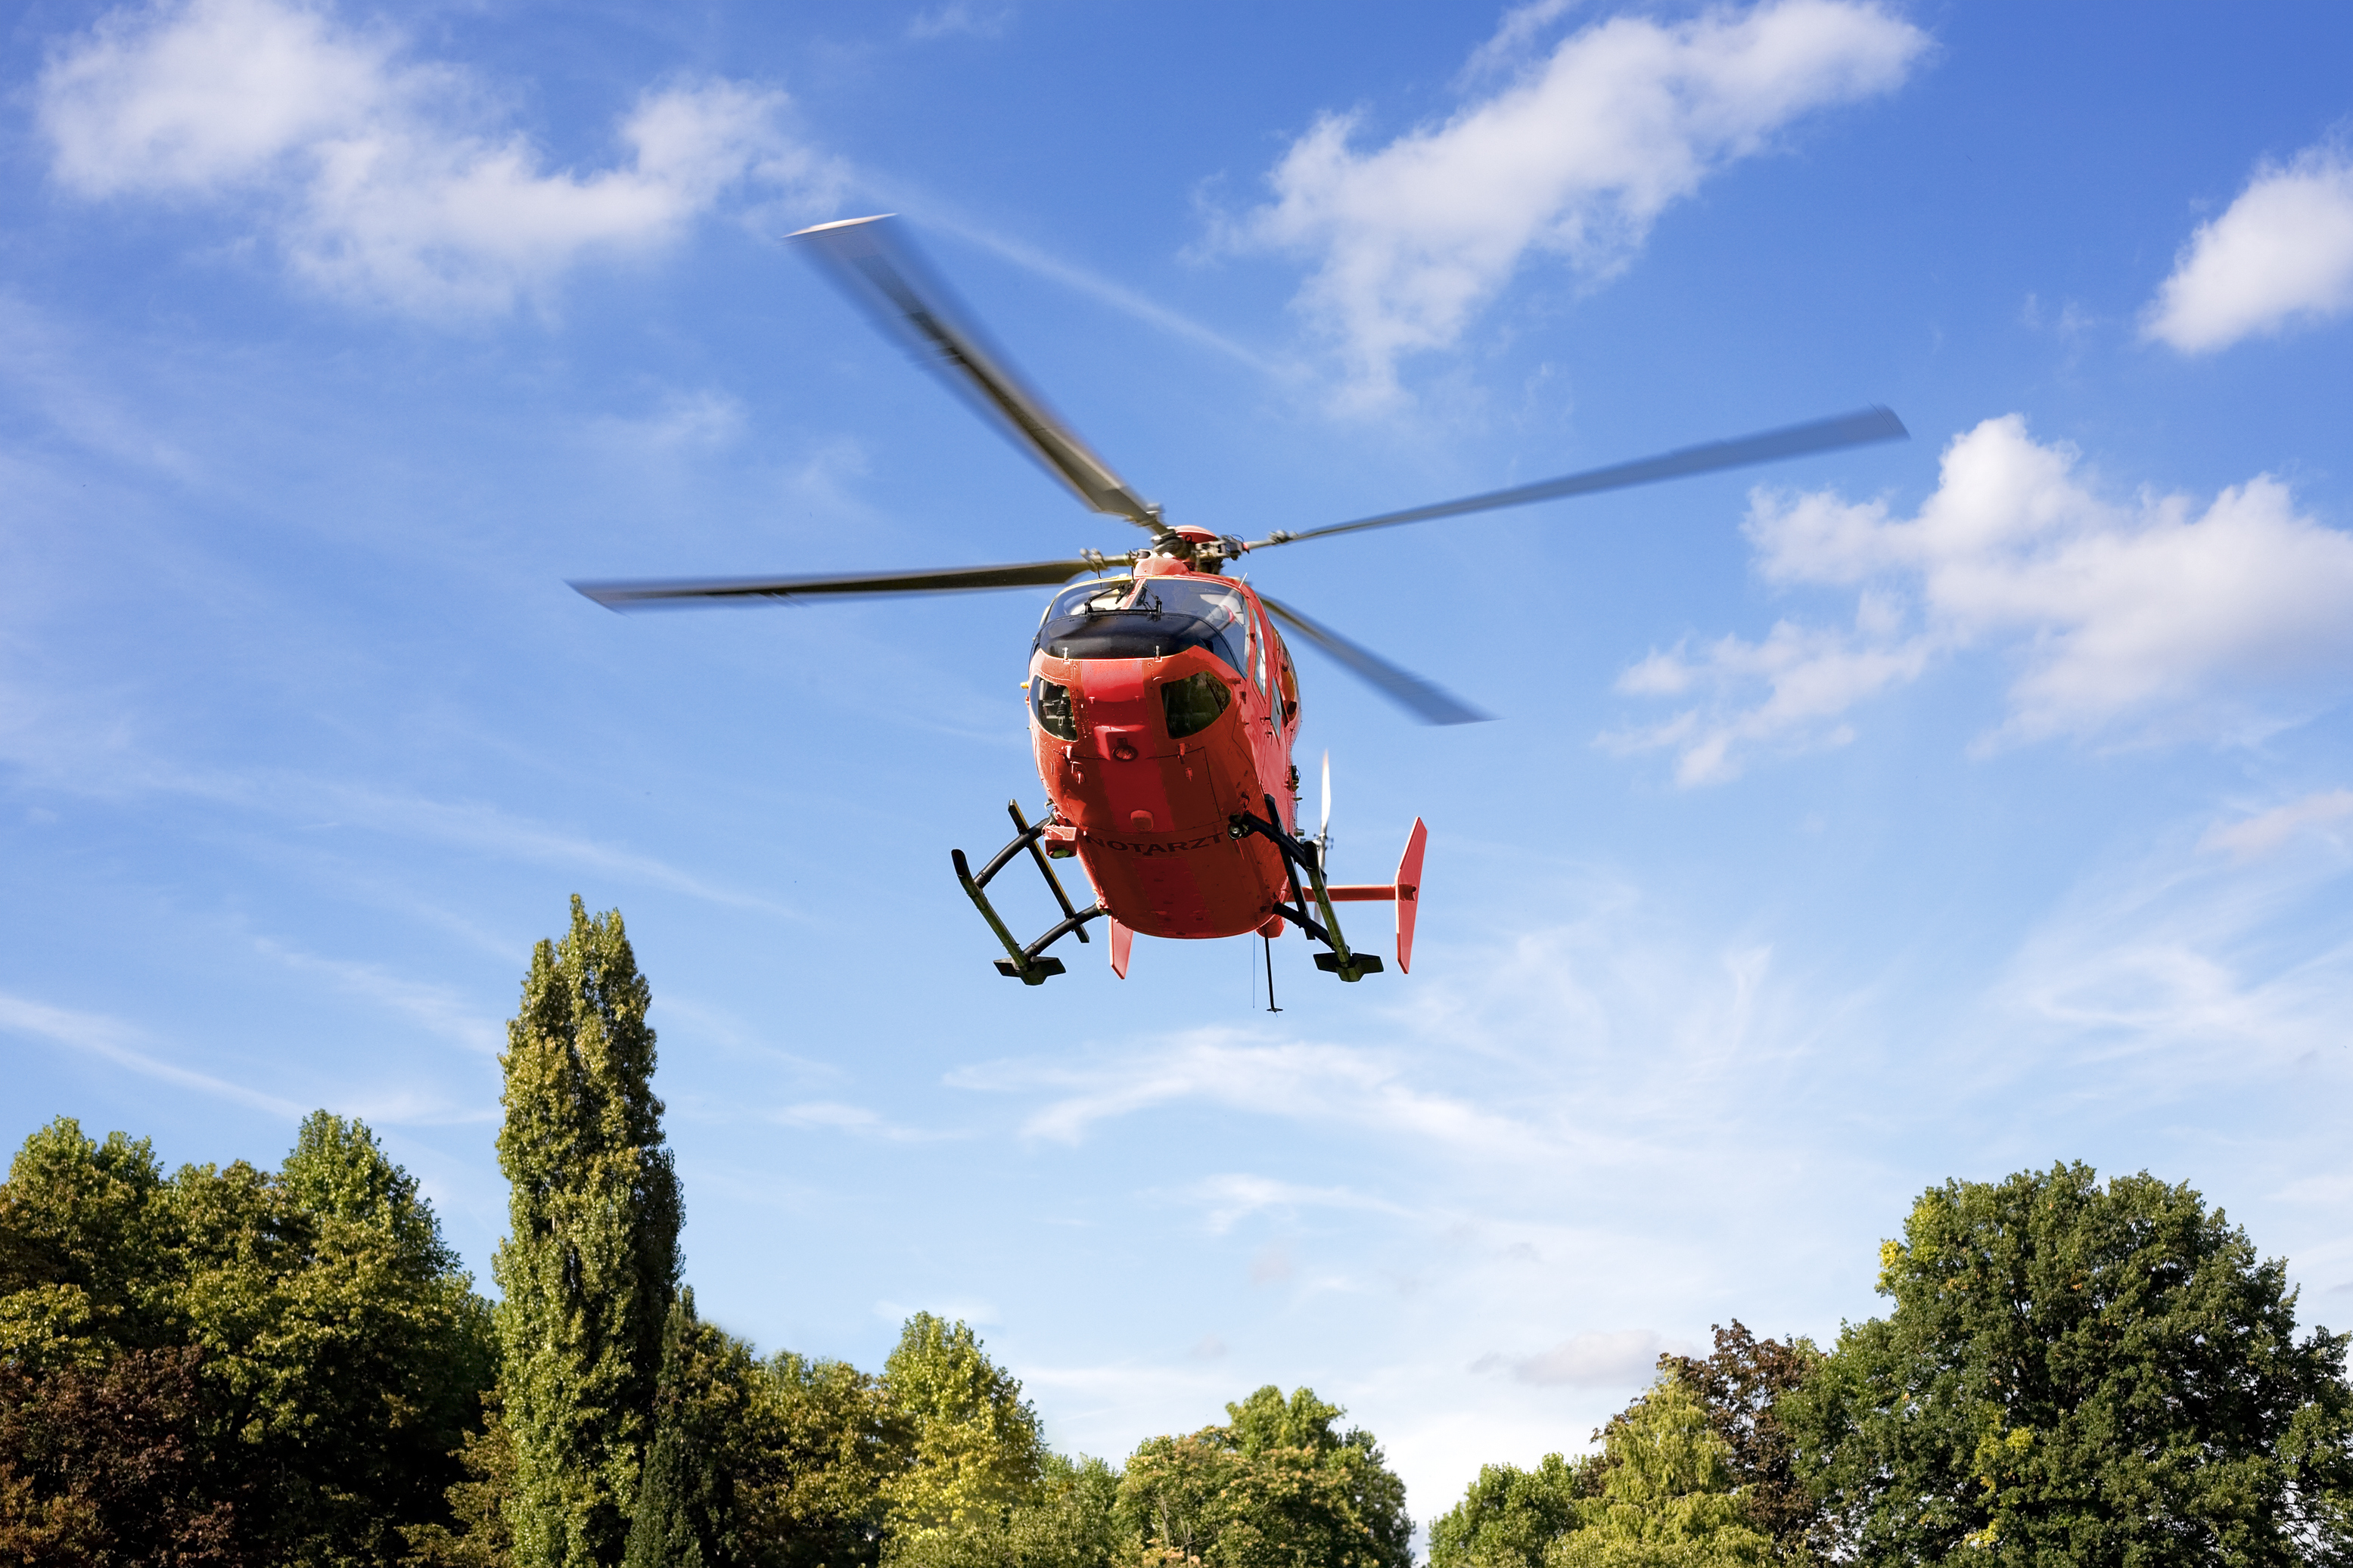 Helicopter flying over a tree-lined area against a blue sky with scattered clouds